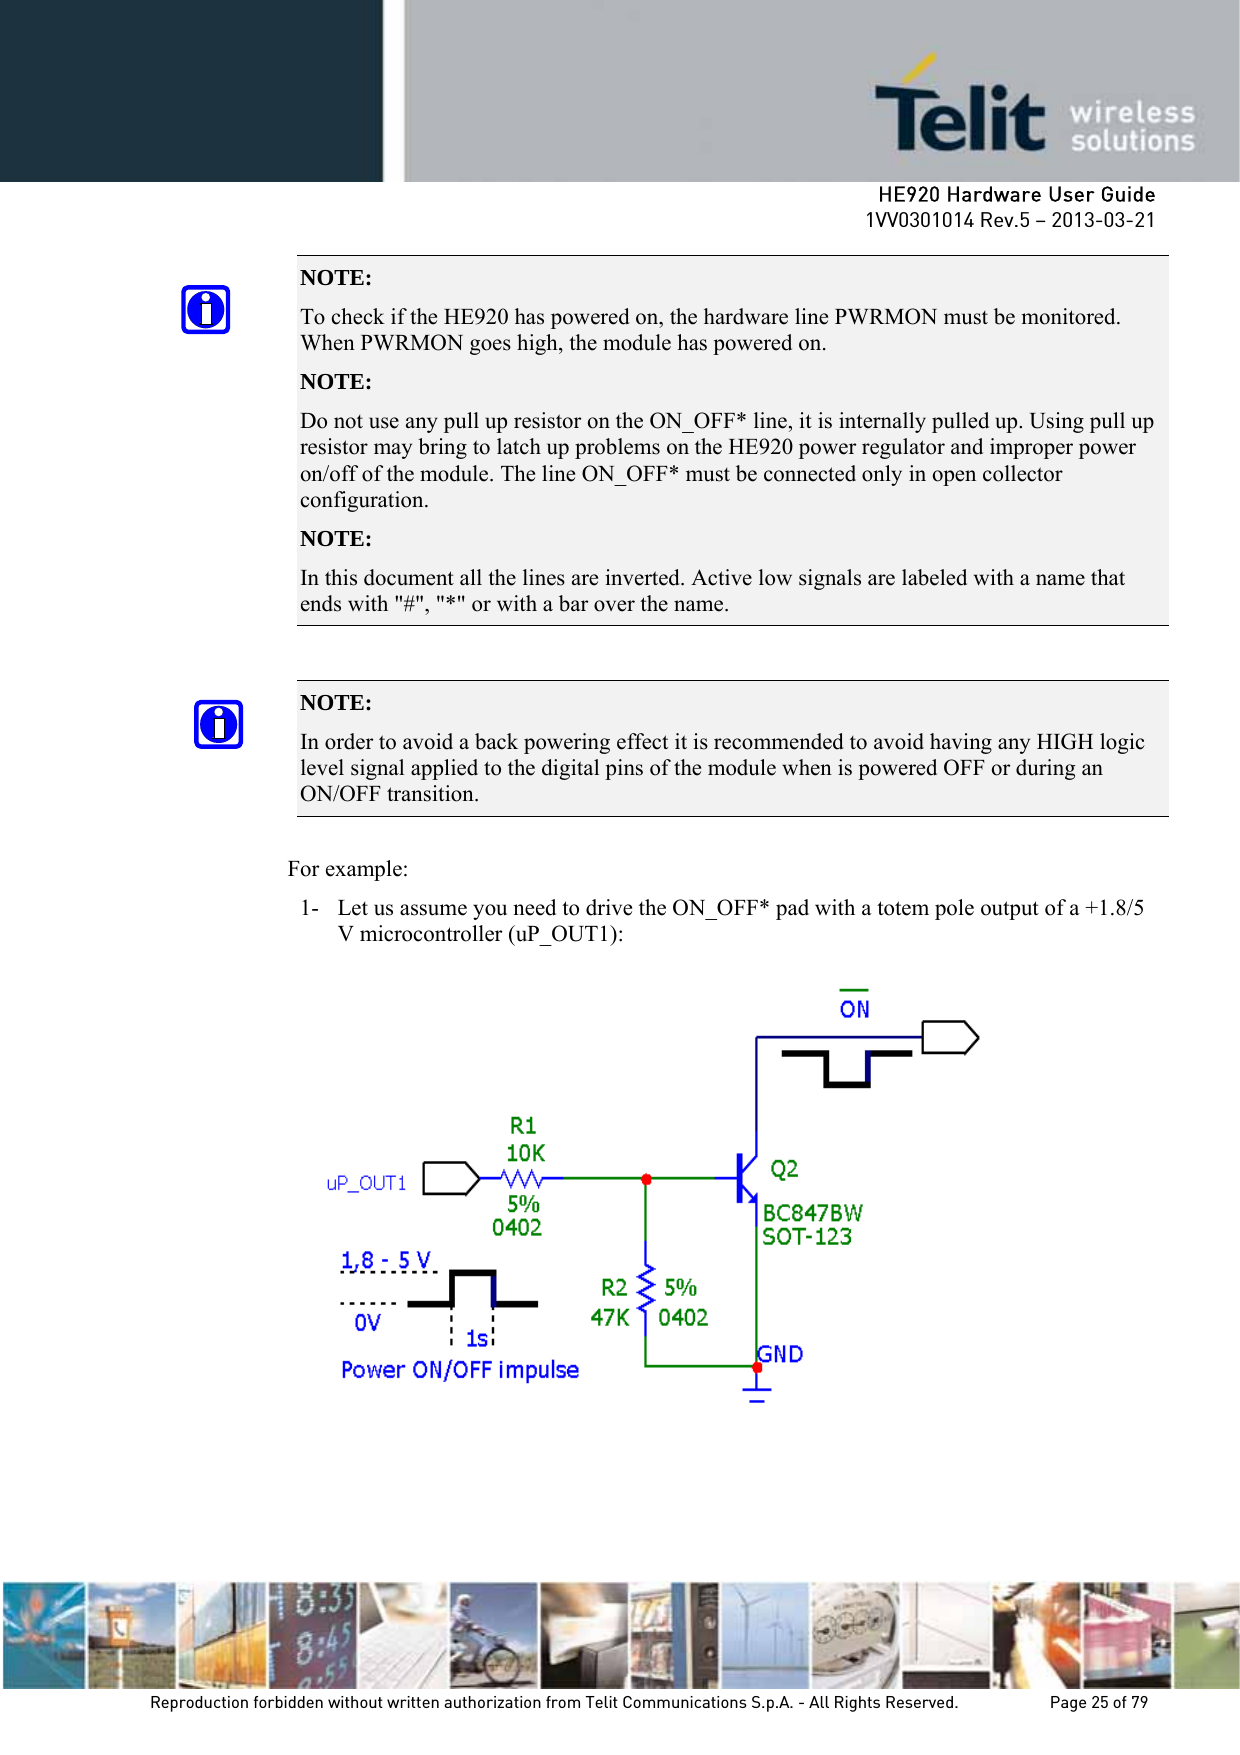     HE920 Hardware User Guide 1VV0301014 Rev.5 – 2013-03-21 Reproduction forbidden without written authorization from Telit Communications S.p.A. - All Rights Reserved.    Page 25 of 79  NOTE:  To check if the HE920 has powered on, the hardware line PWRMON must be monitored. When PWRMON goes high, the module has powered on. NOTE:  Do not use any pull up resistor on the ON_OFF* line, it is internally pulled up. Using pull up resistor may bring to latch up problems on the HE920 power regulator and improper power on/off of the module. The line ON_OFF* must be connected only in open collector configuration. NOTE:  In this document all the lines are inverted. Active low signals are labeled with a name that ends with &quot;#&quot;, &quot;*&quot; or with a bar over the name.  NOTE:  In order to avoid a back powering effect it is recommended to avoid having any HIGH logic level signal applied to the digital pins of the module when is powered OFF or during an ON/OFF transition.  For example: 1- Let us assume you need to drive the ON_OFF* pad with a totem pole output of a +1.8/5 V microcontroller (uP_OUT1):    